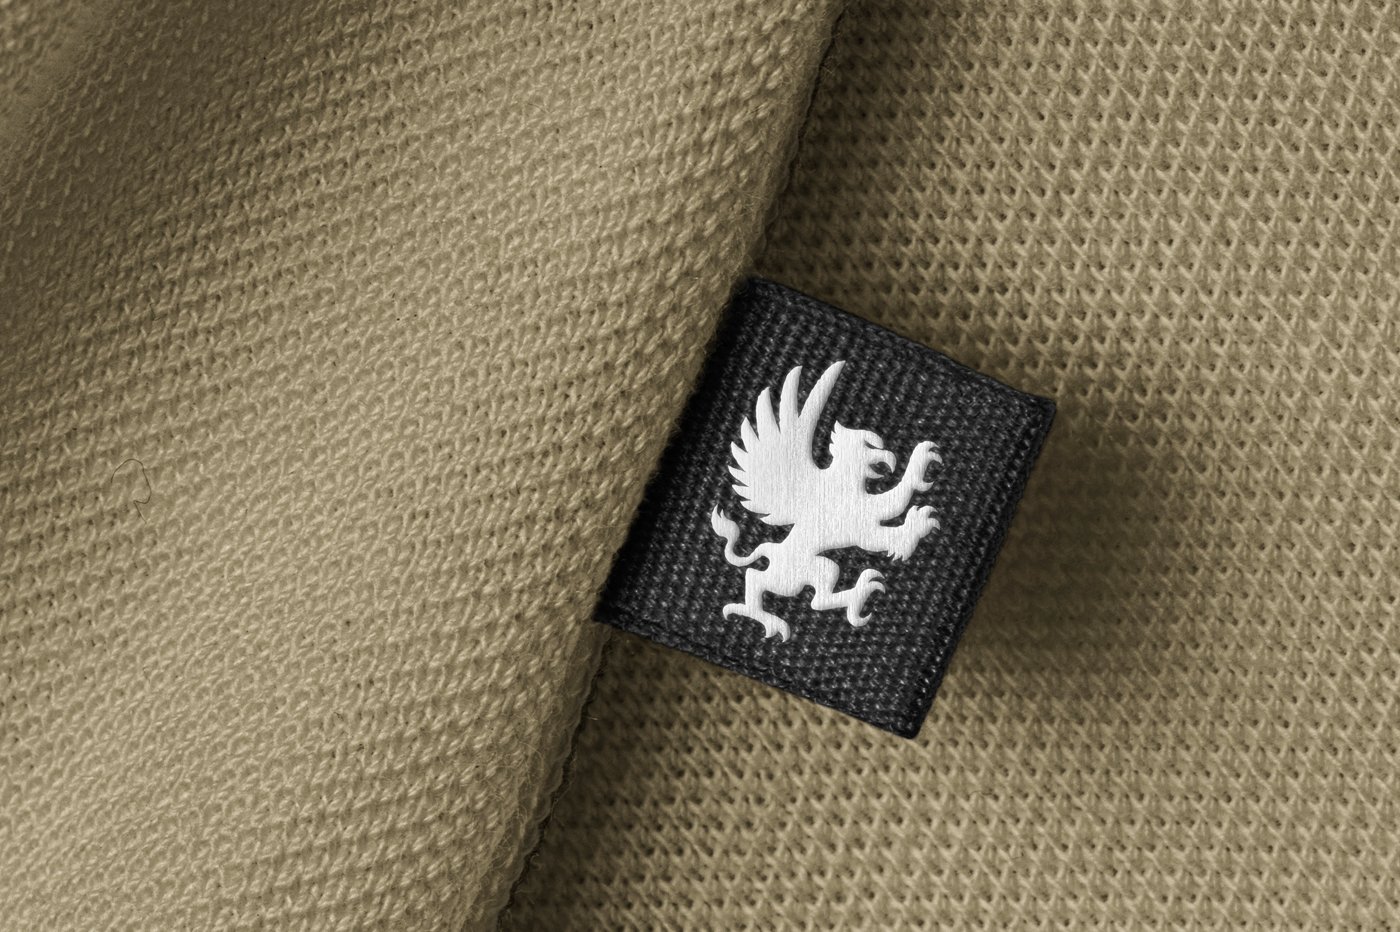 Woven Label Embroidery Logo Mockup cover image.